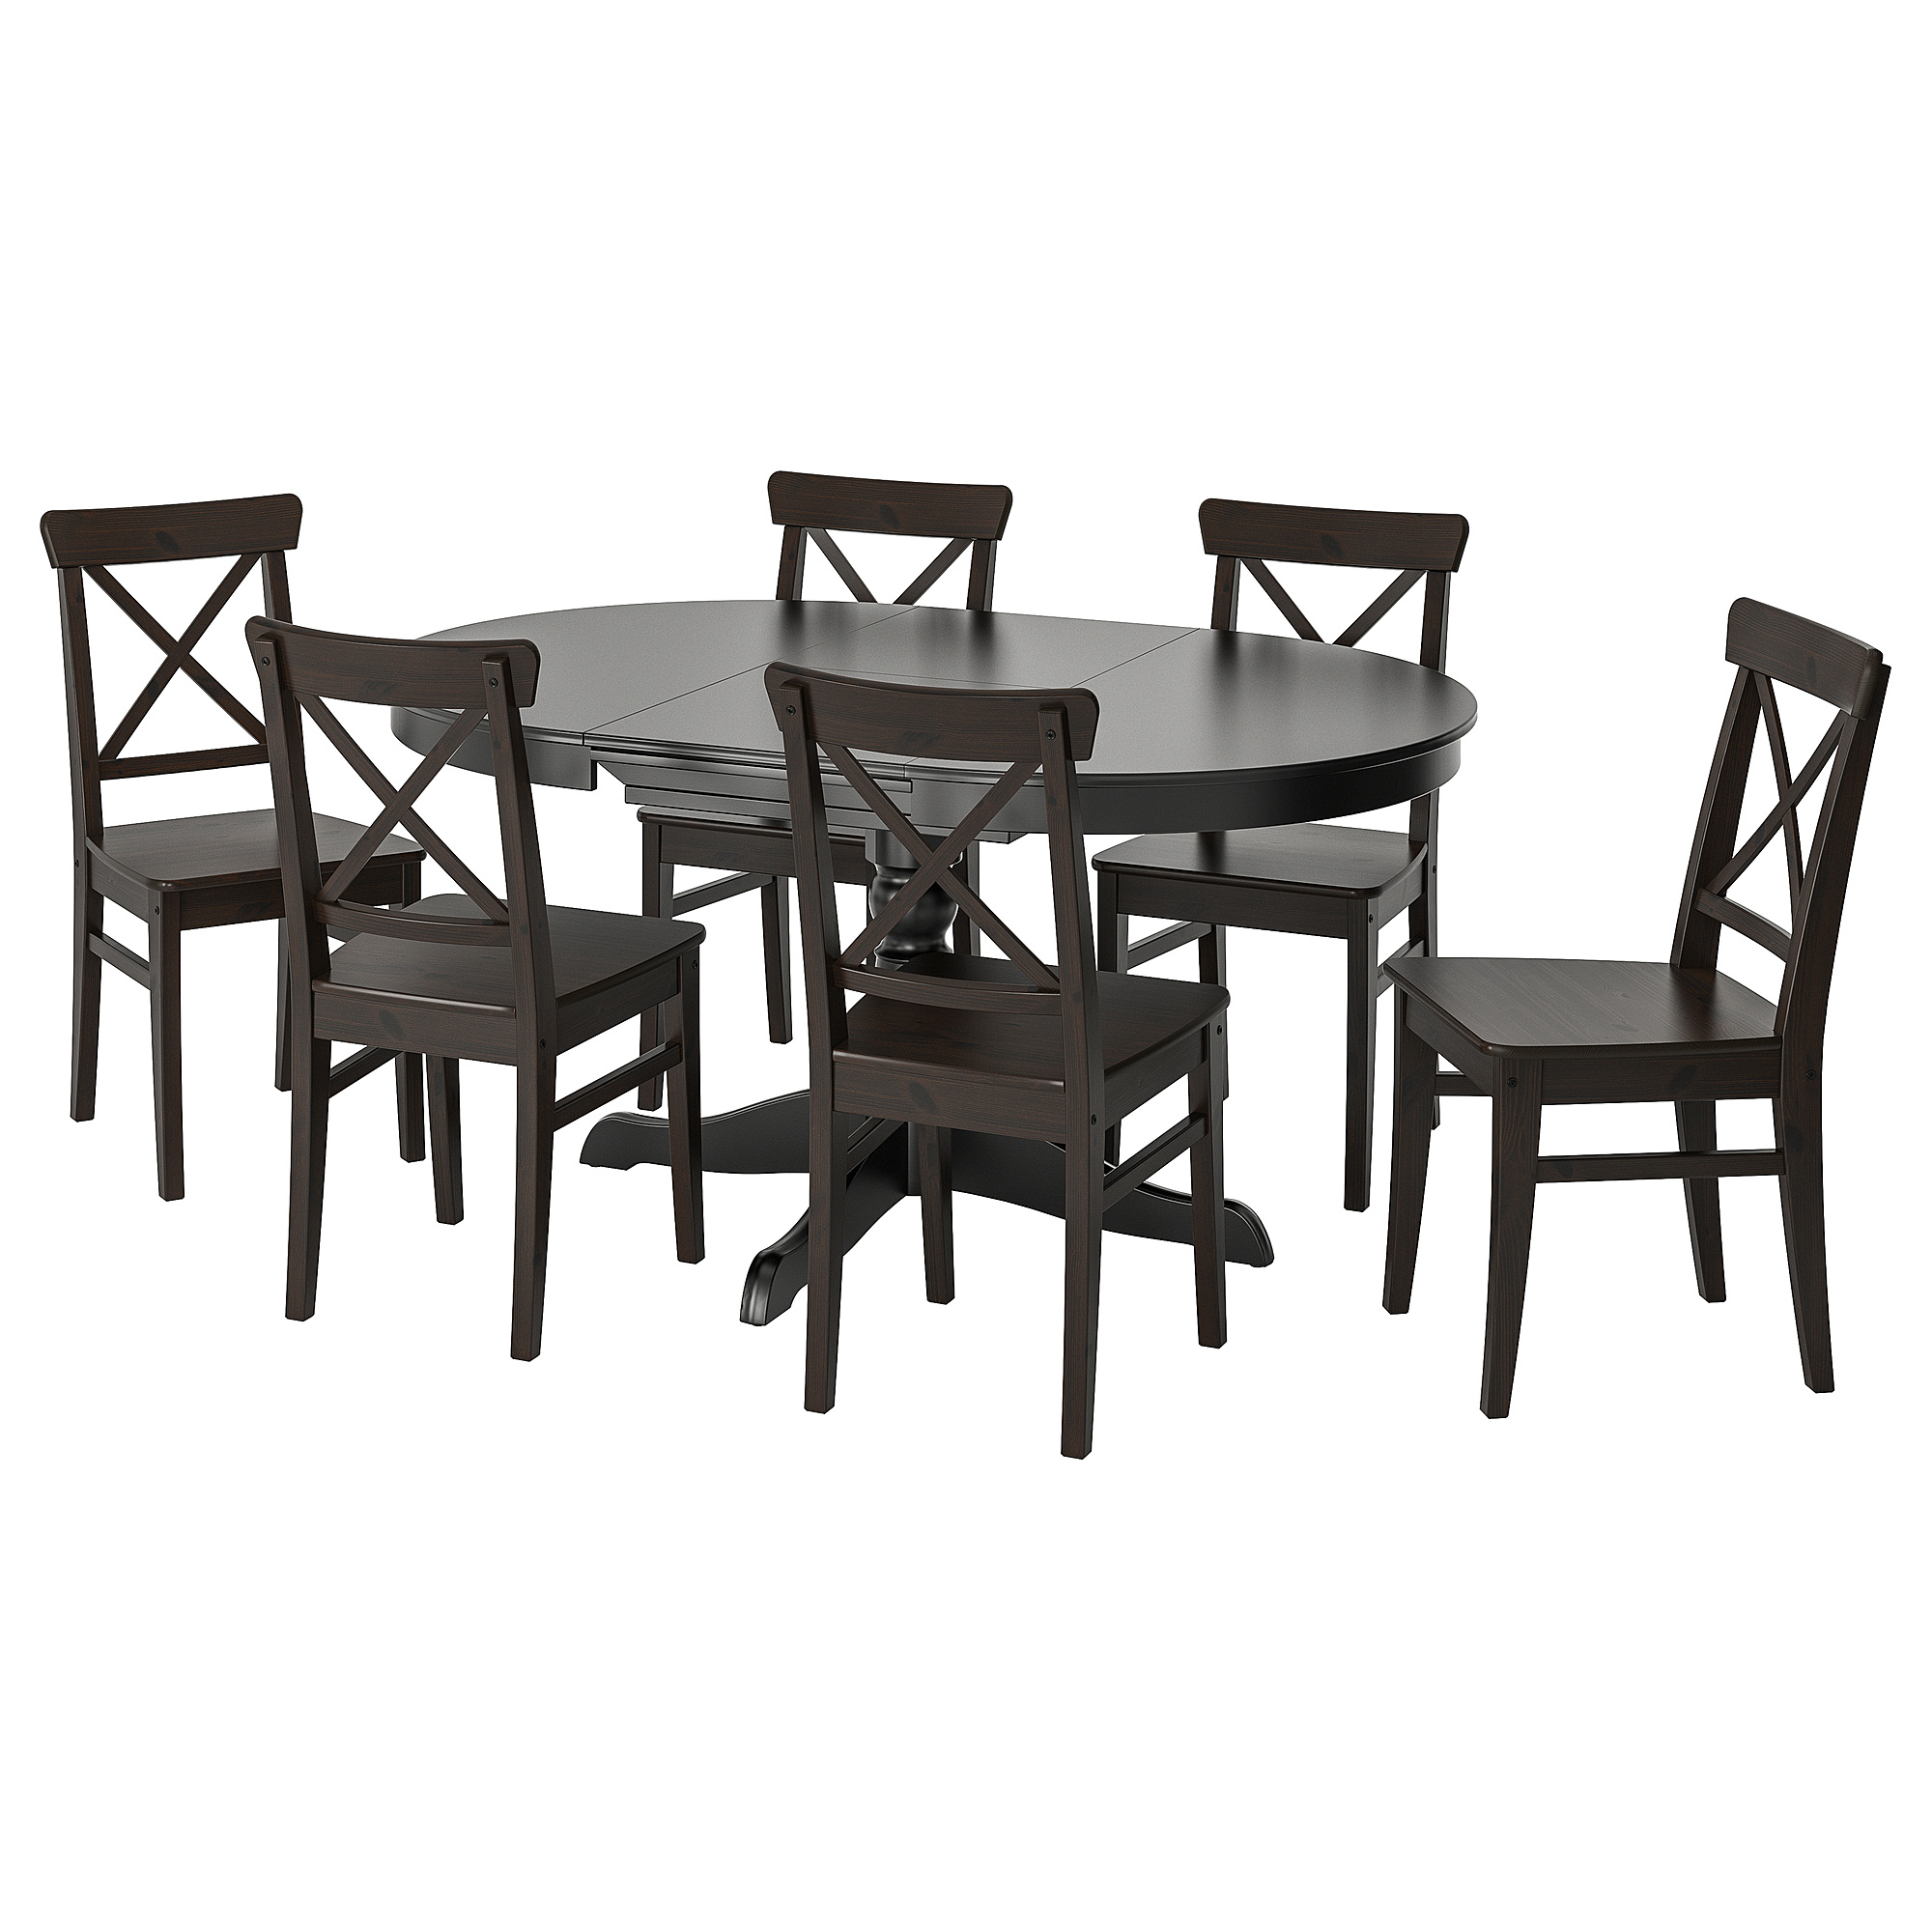 INGATORP/INGOLF table and 6 chairs